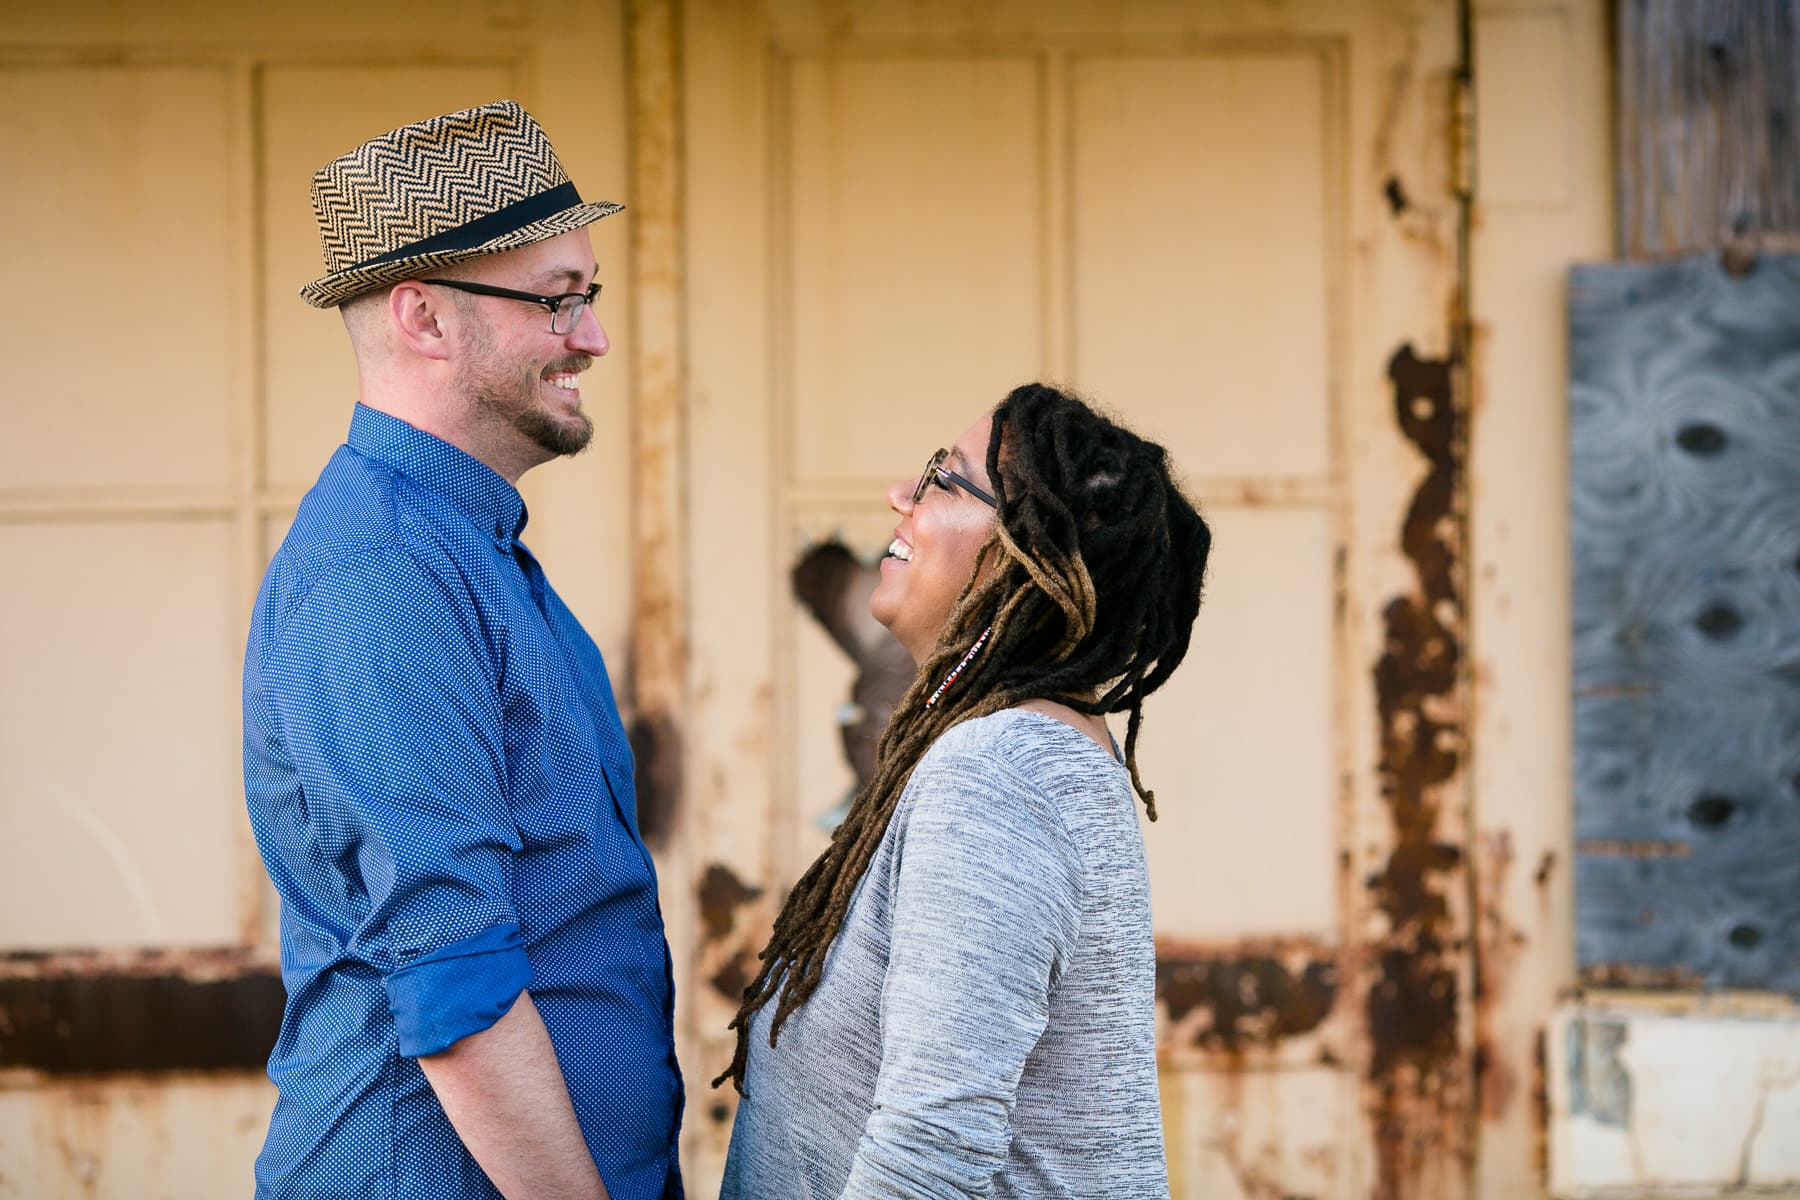 Man in hat smiling and looking at woman with dreadlocks in front of rusted door